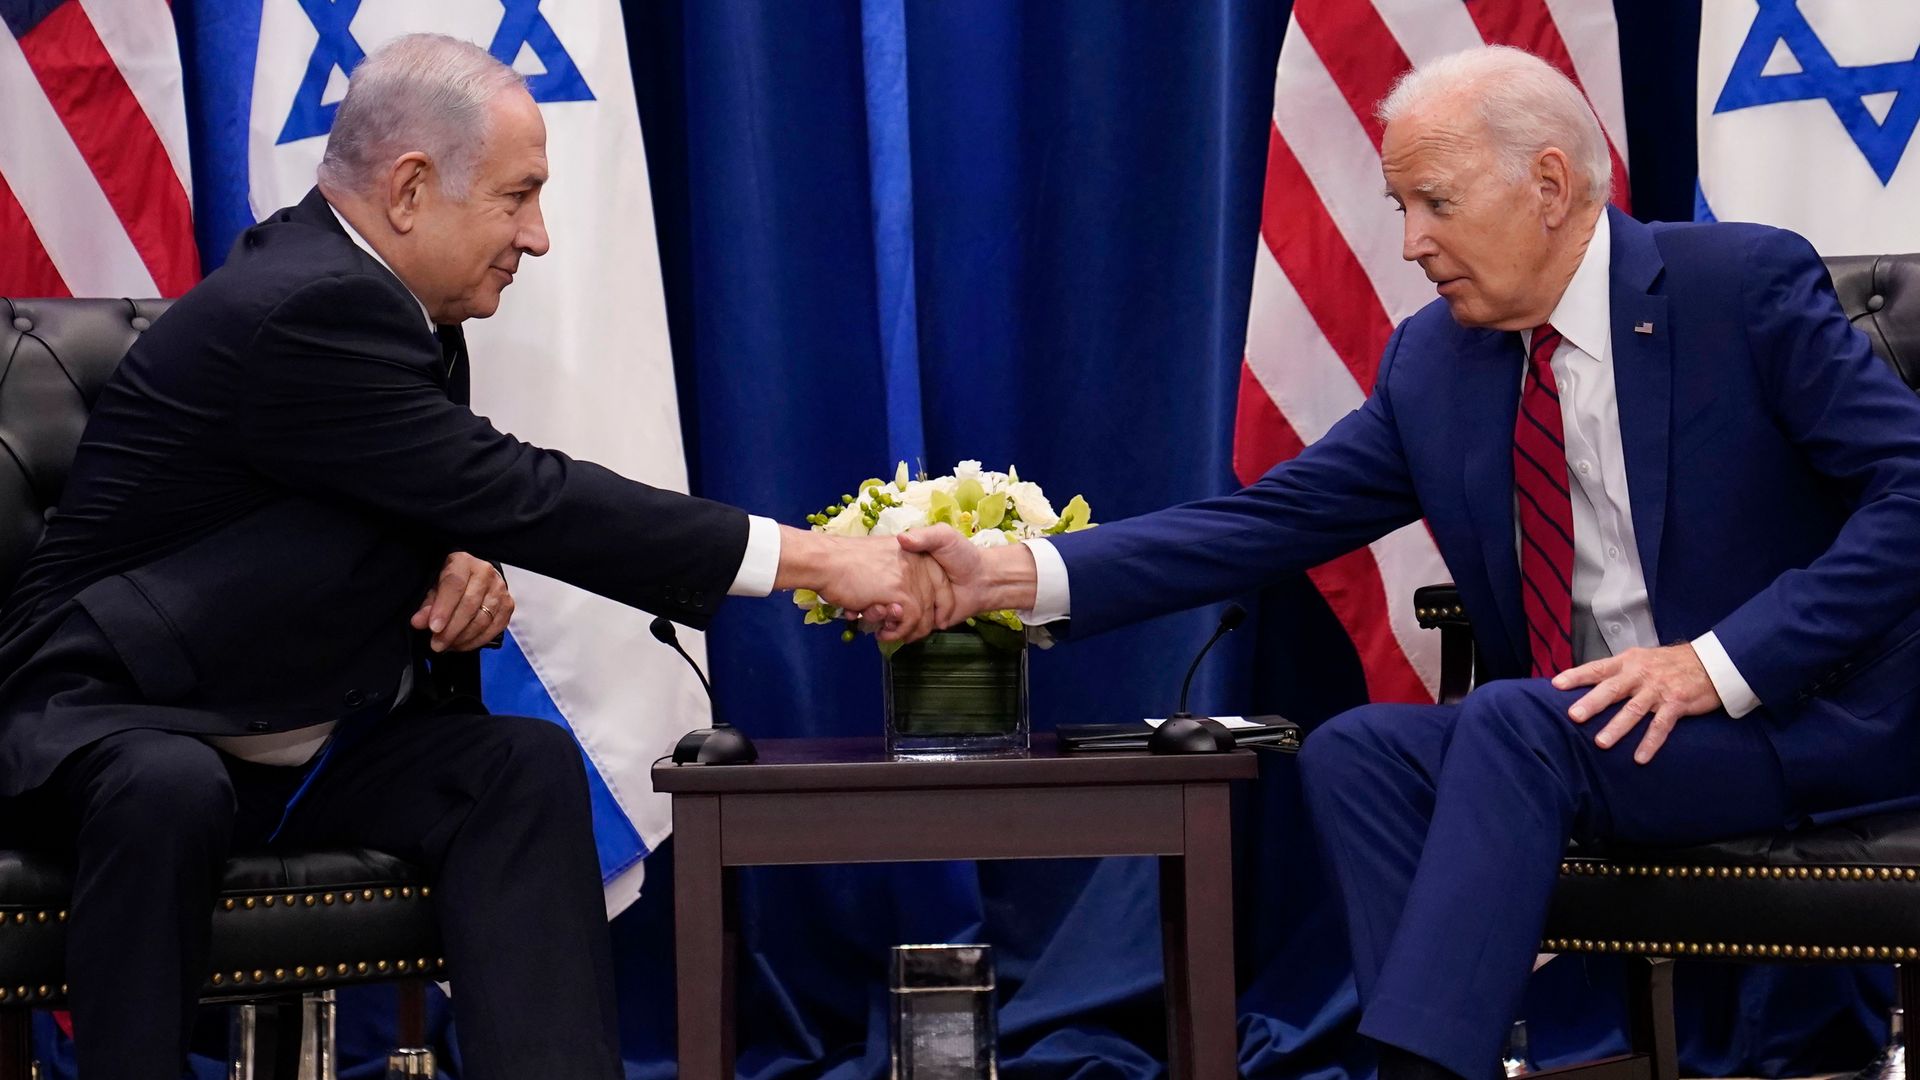 What happens to Israel after the era of U.S. global leadership comes to an end? Here are a number of key things to look out for.